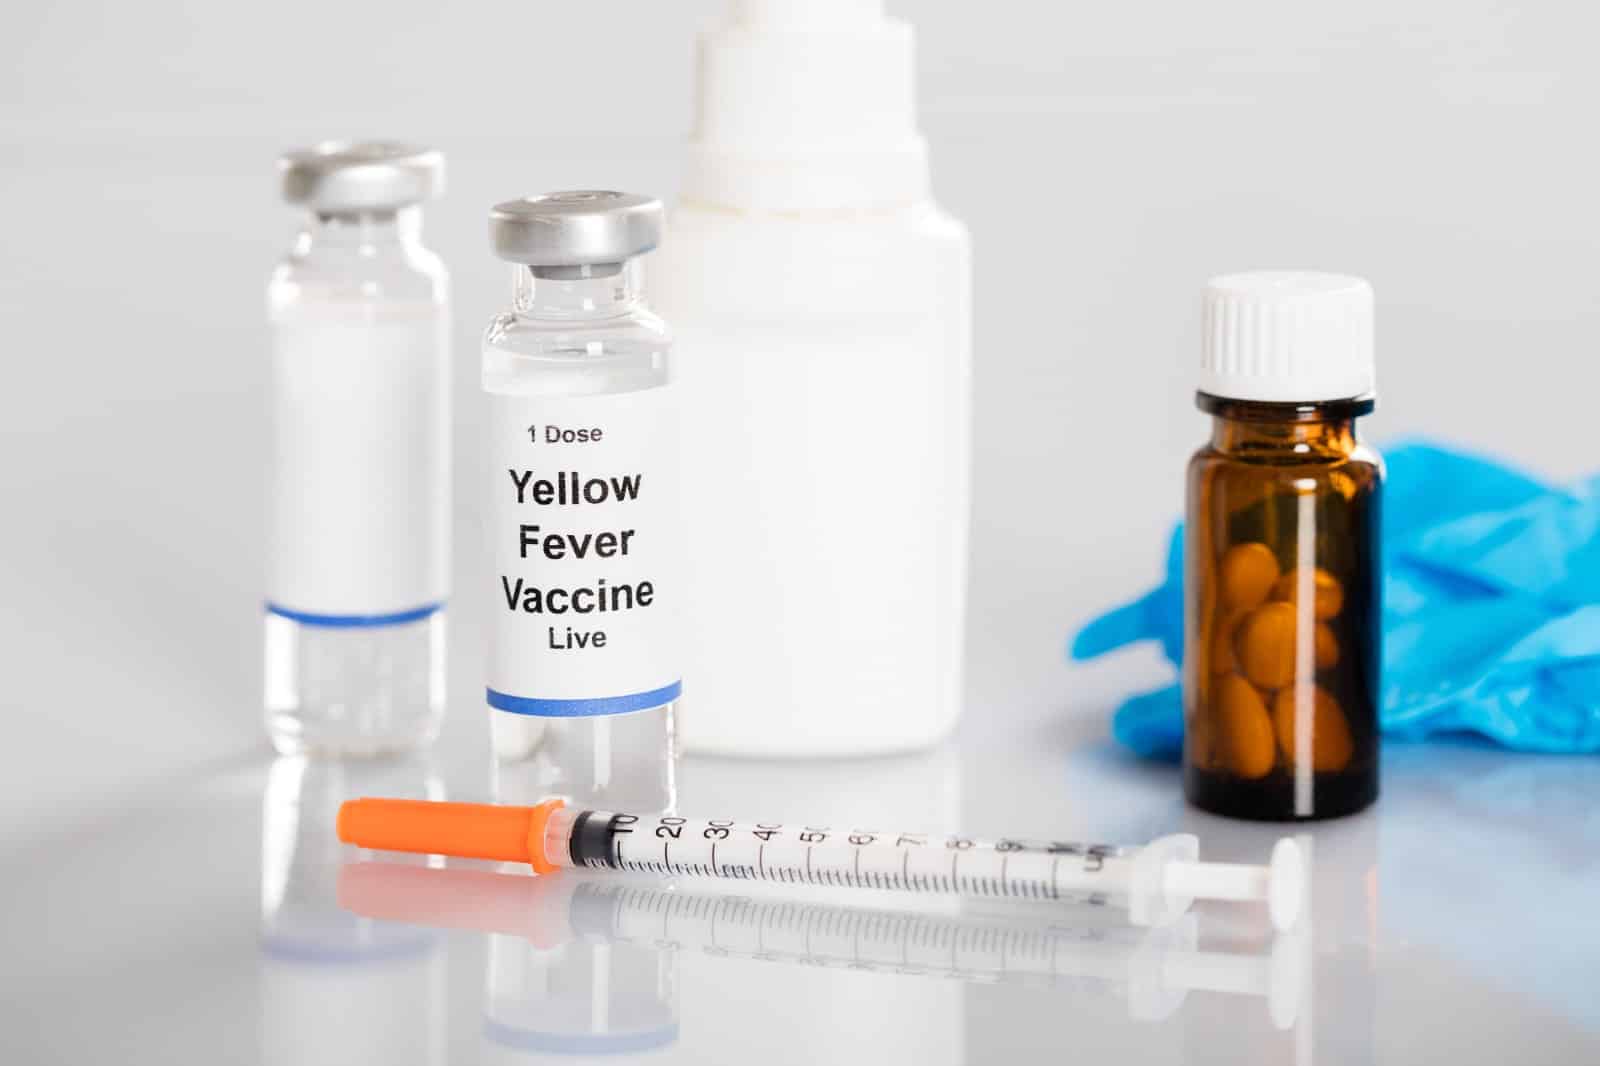 rare-side-effects-of-the-yellow-fever-vaccine-understanding-risk-and-benefits